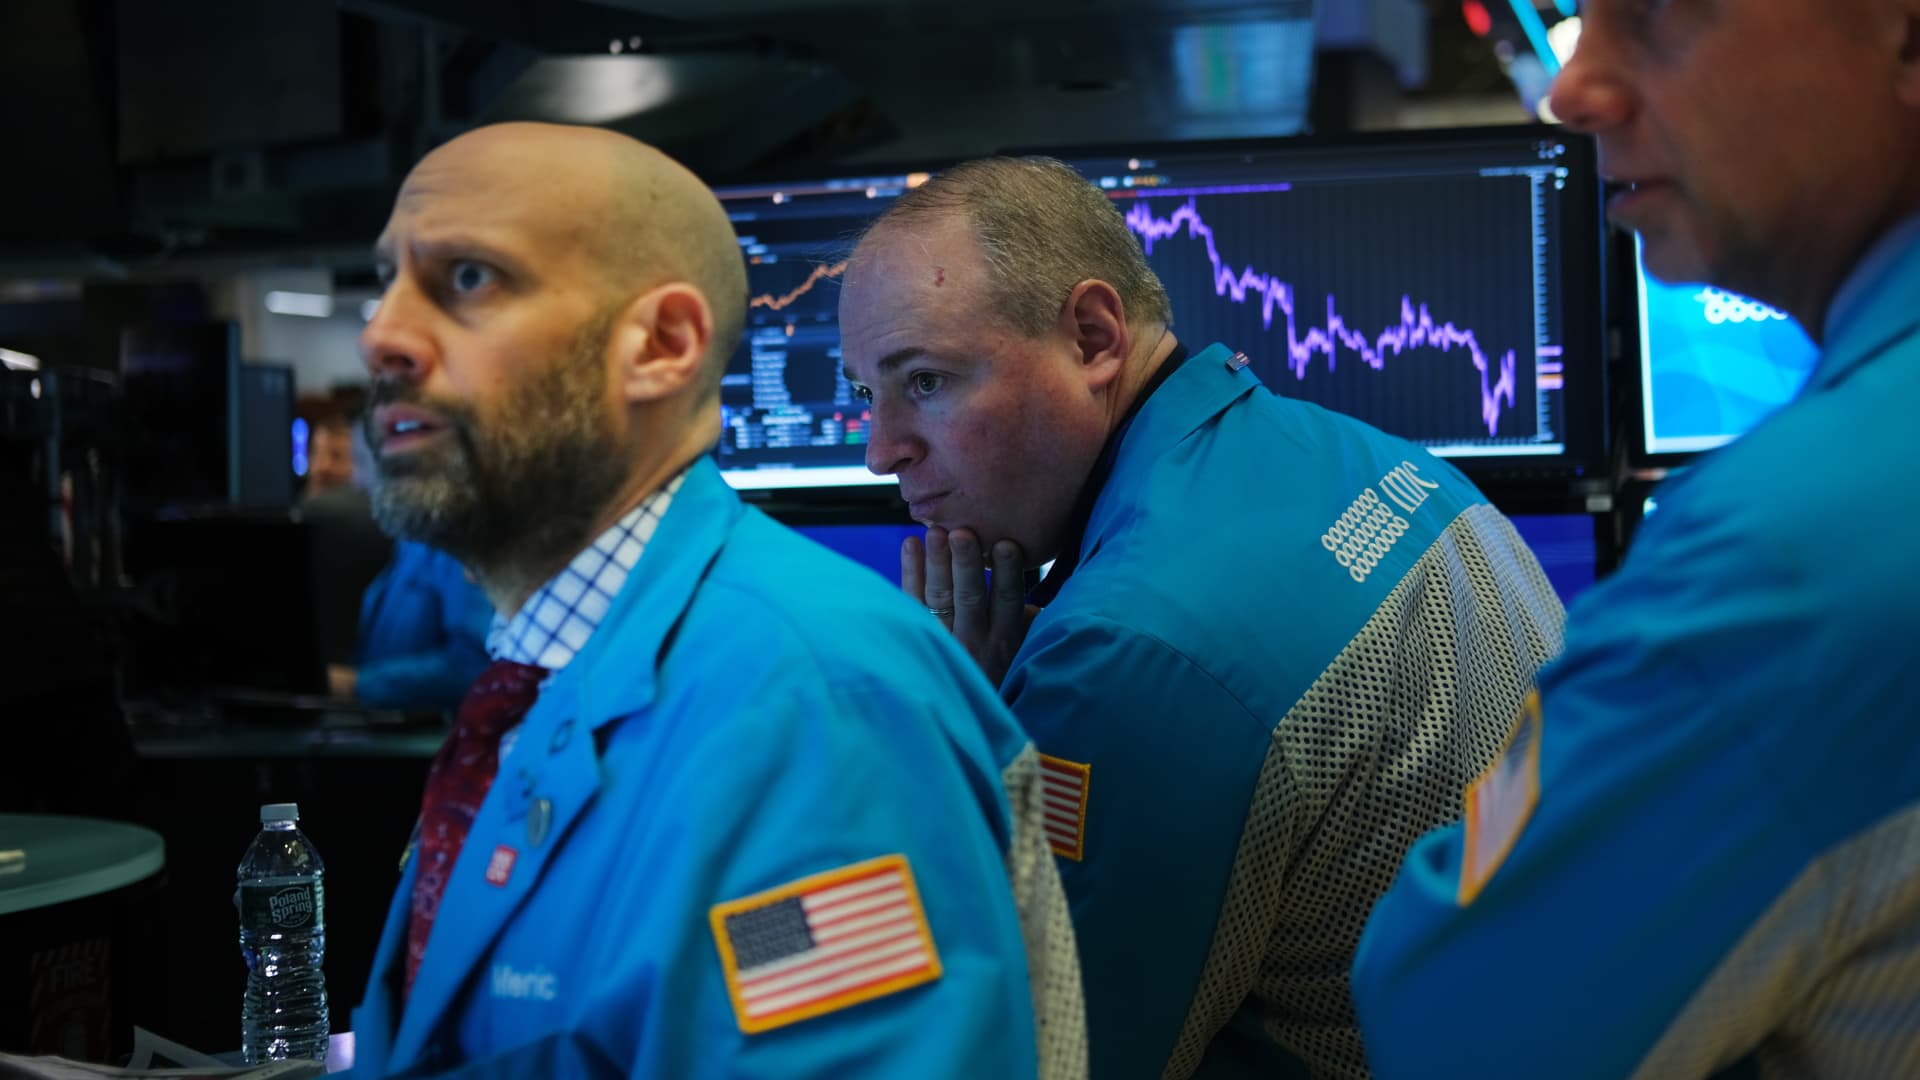 Dow closes more than 300 points lower as December selloff resumes